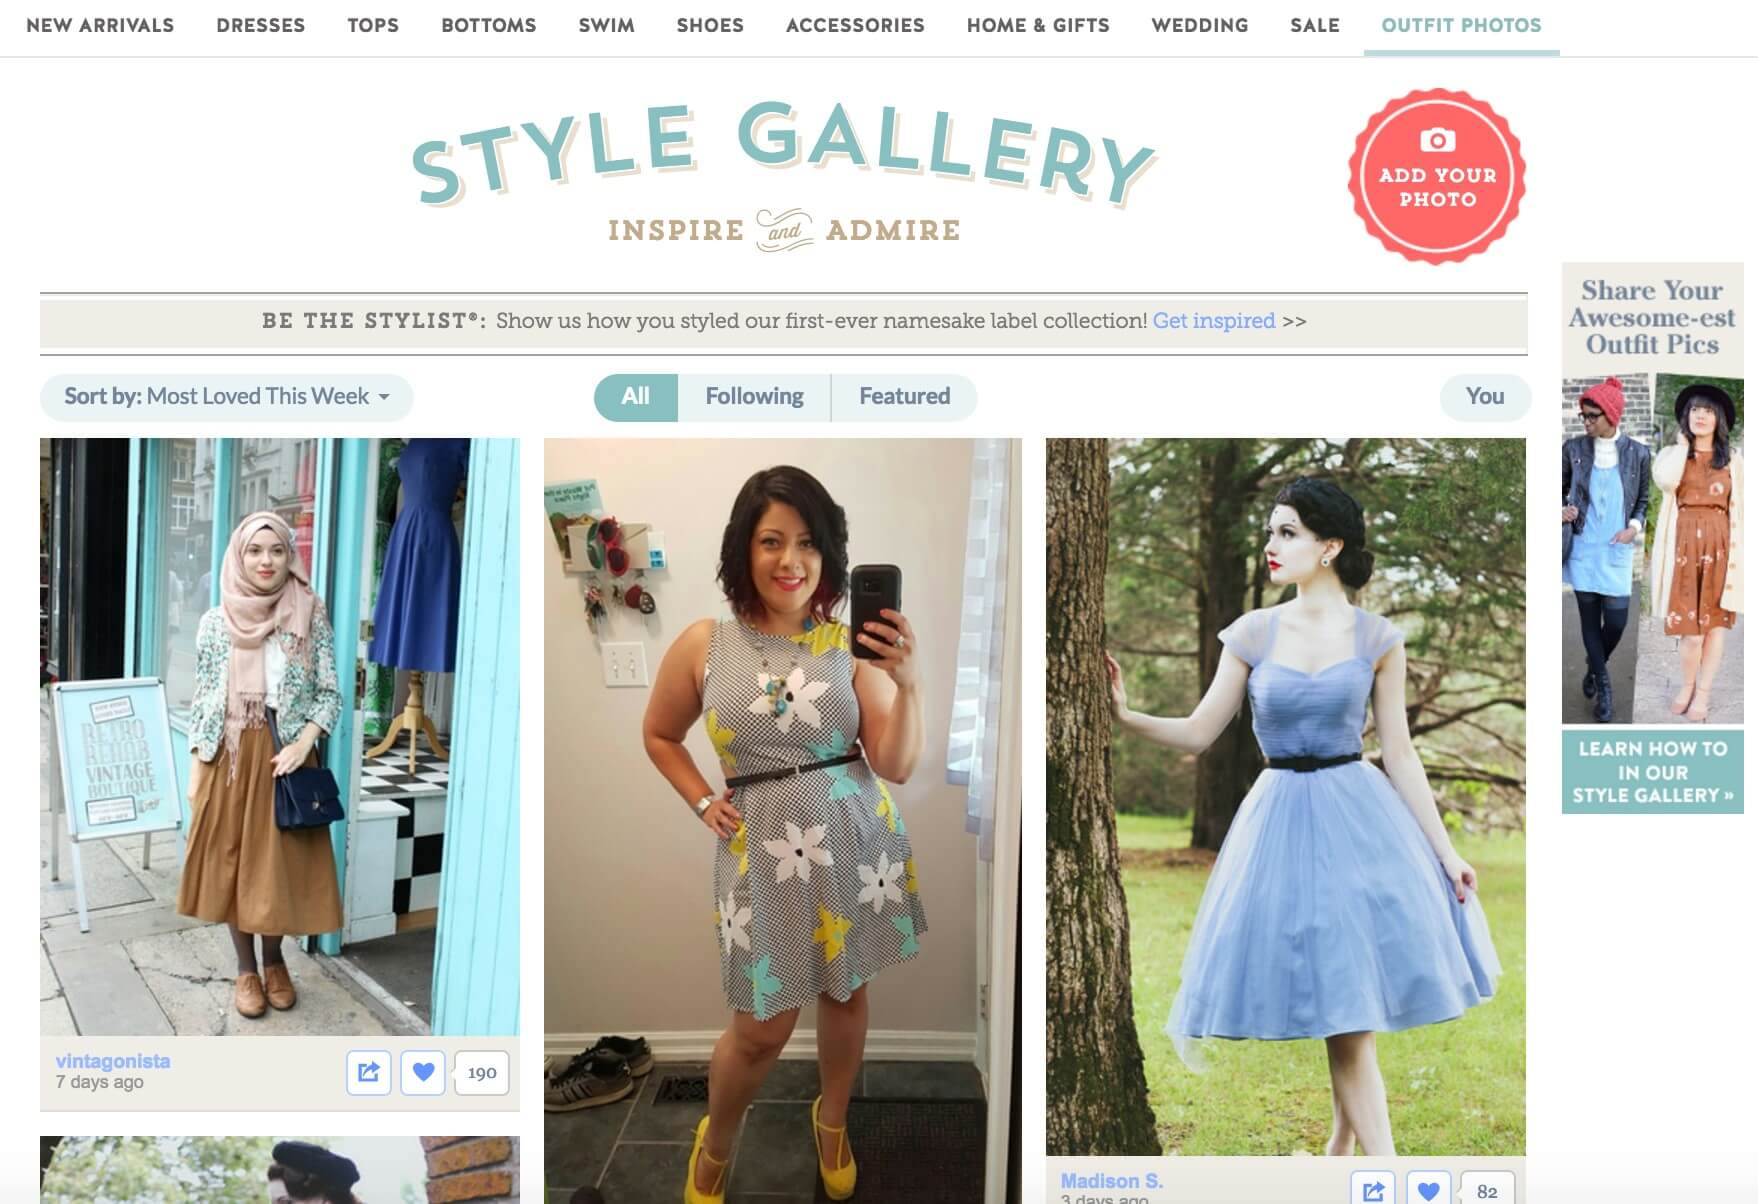 Modcloth's user generated photos